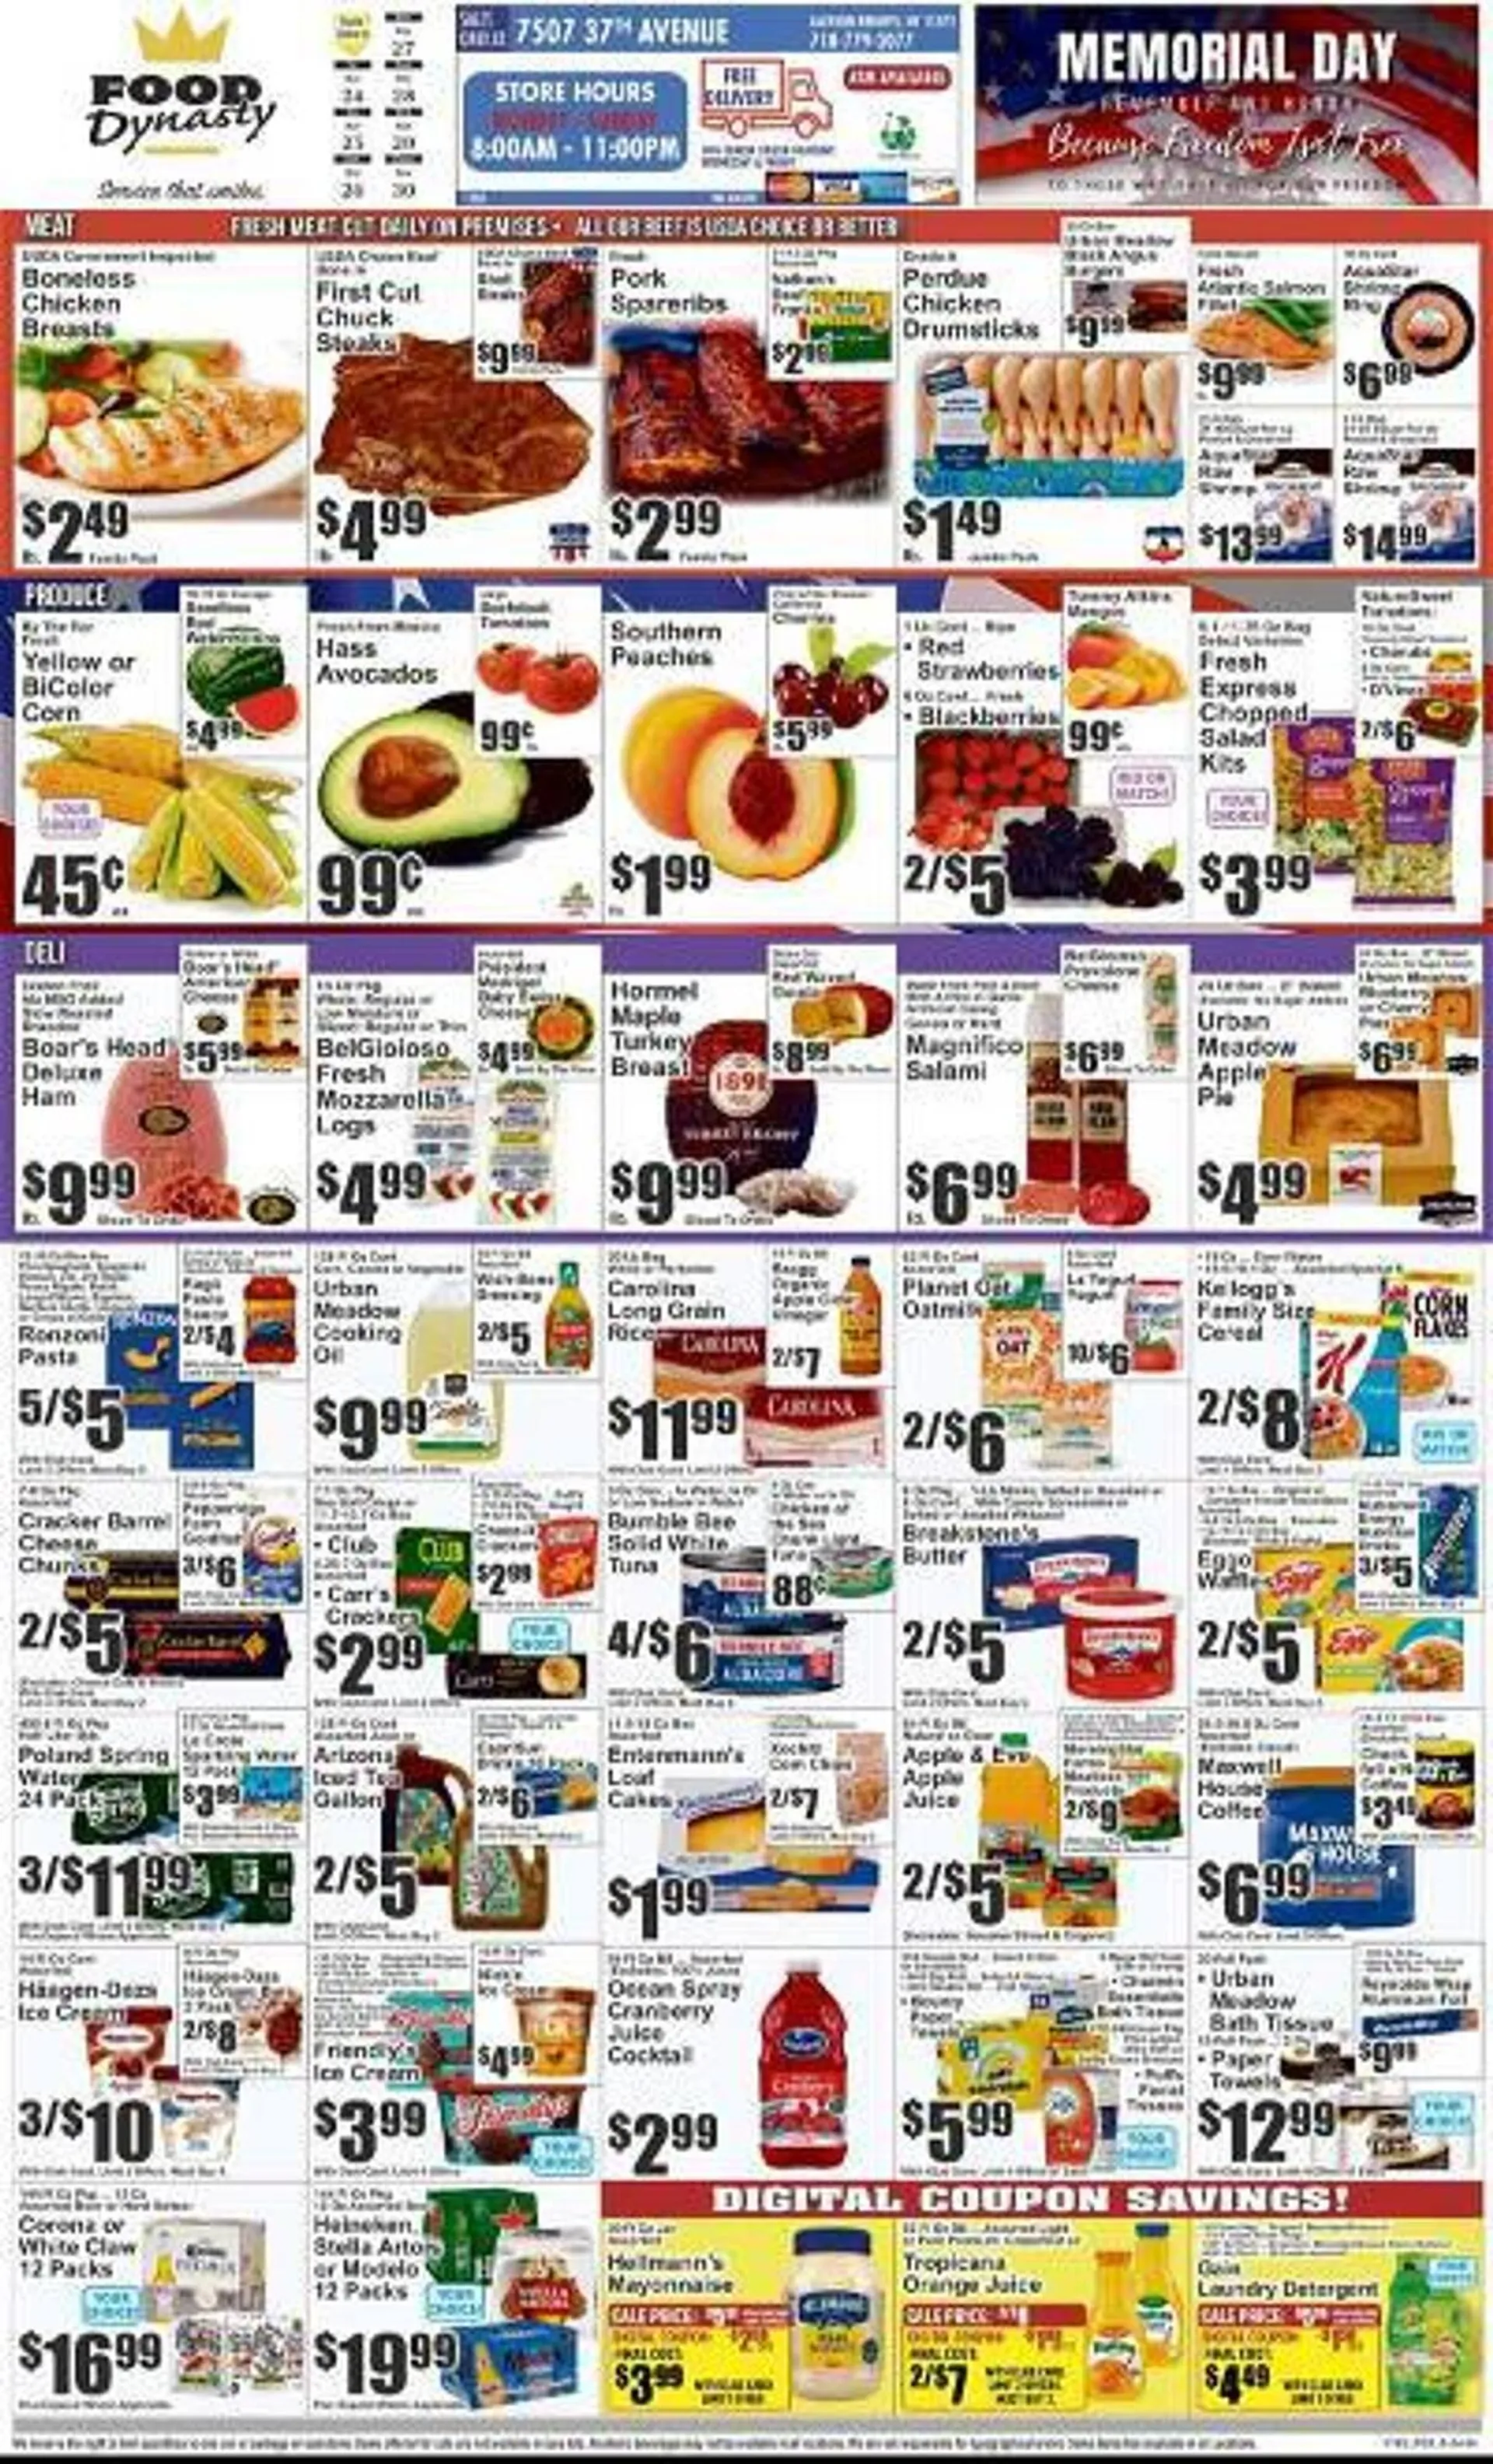 Almontes Food Dynasty Marketplace Weekly Ad - 1